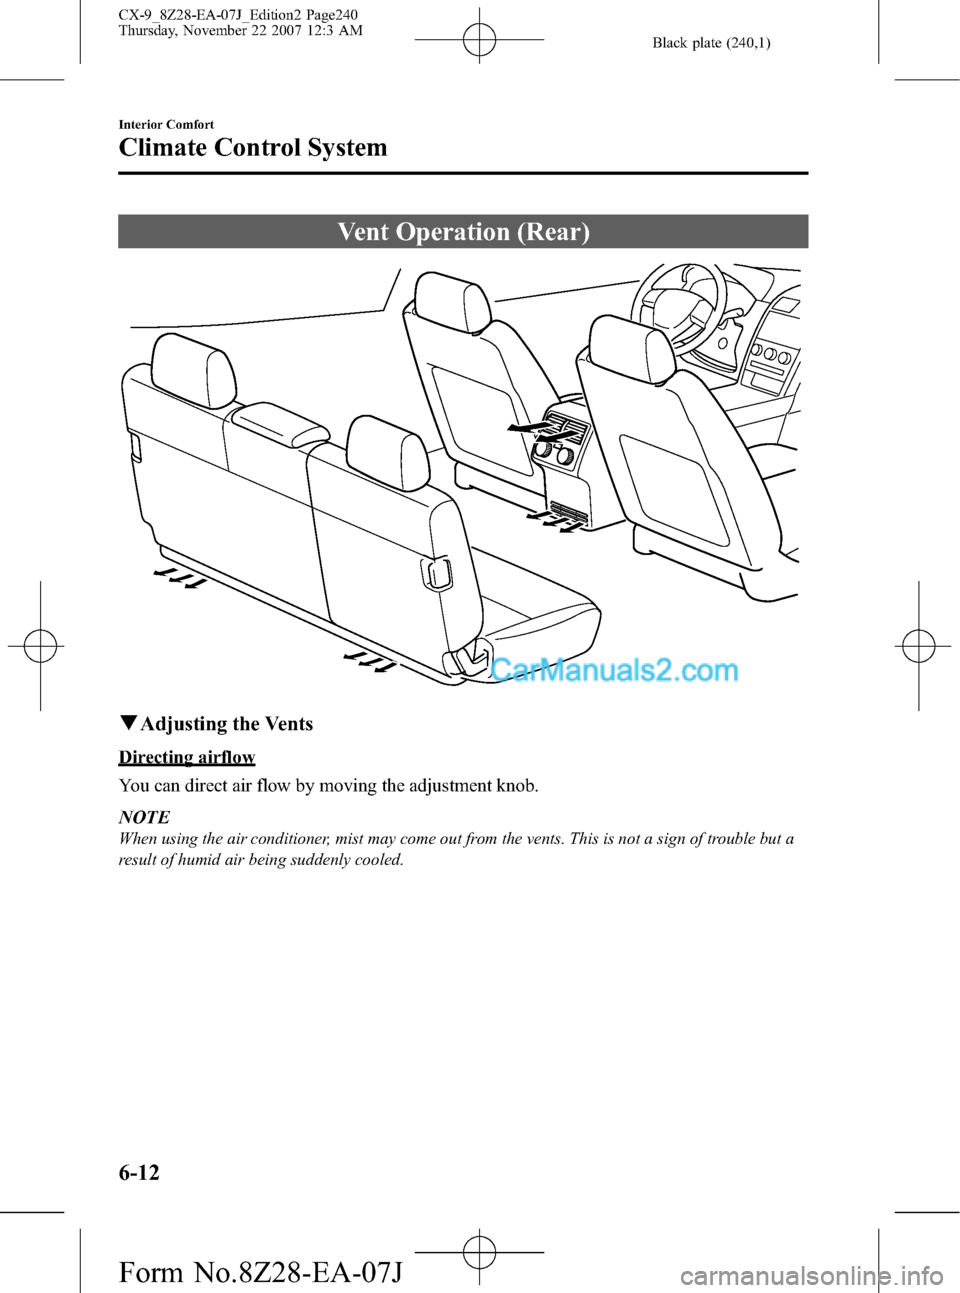 MAZDA MODEL CX-9 2008   (in English) Owners Manual Black plate (240,1)
Vent Operation (Rear)
qAdjusting the Vents
Directing airflow
You can direct air flow by moving the adjustment knob.
NOTE
When using the air conditioner, mist may come out from the 